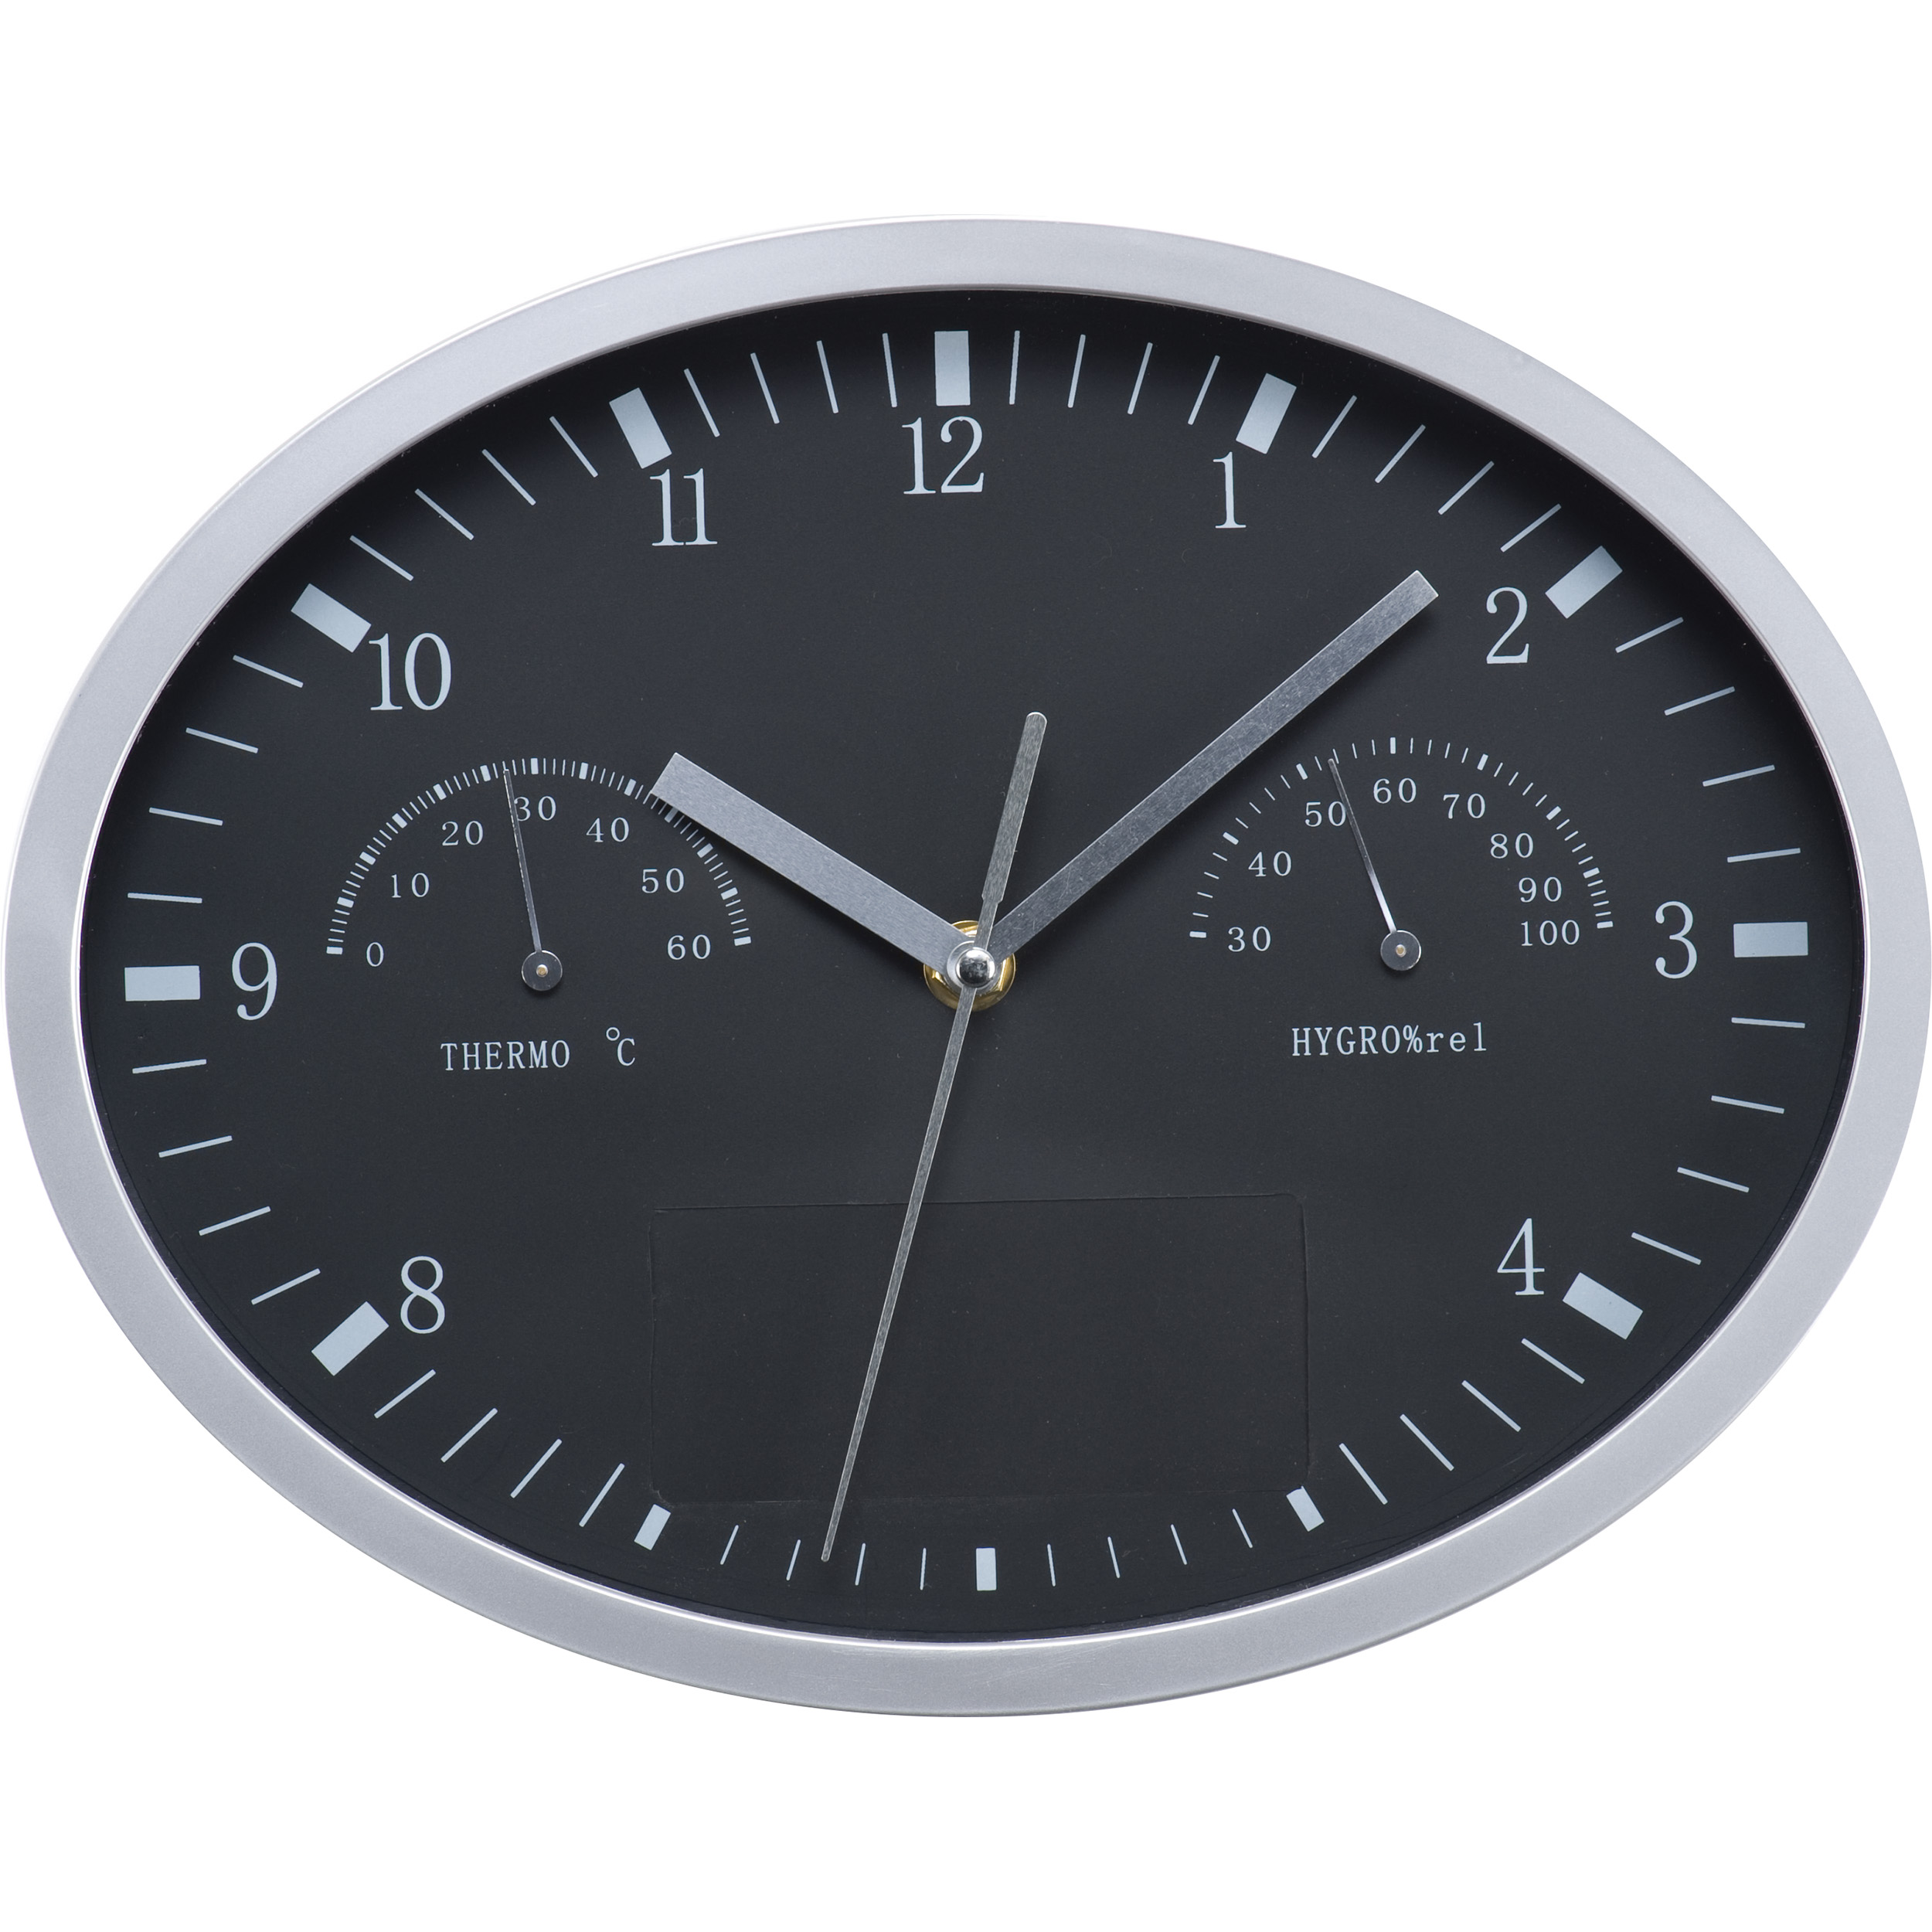 A wall clock that is not only smart but also printable - Chilmark - Barton-on-Sea